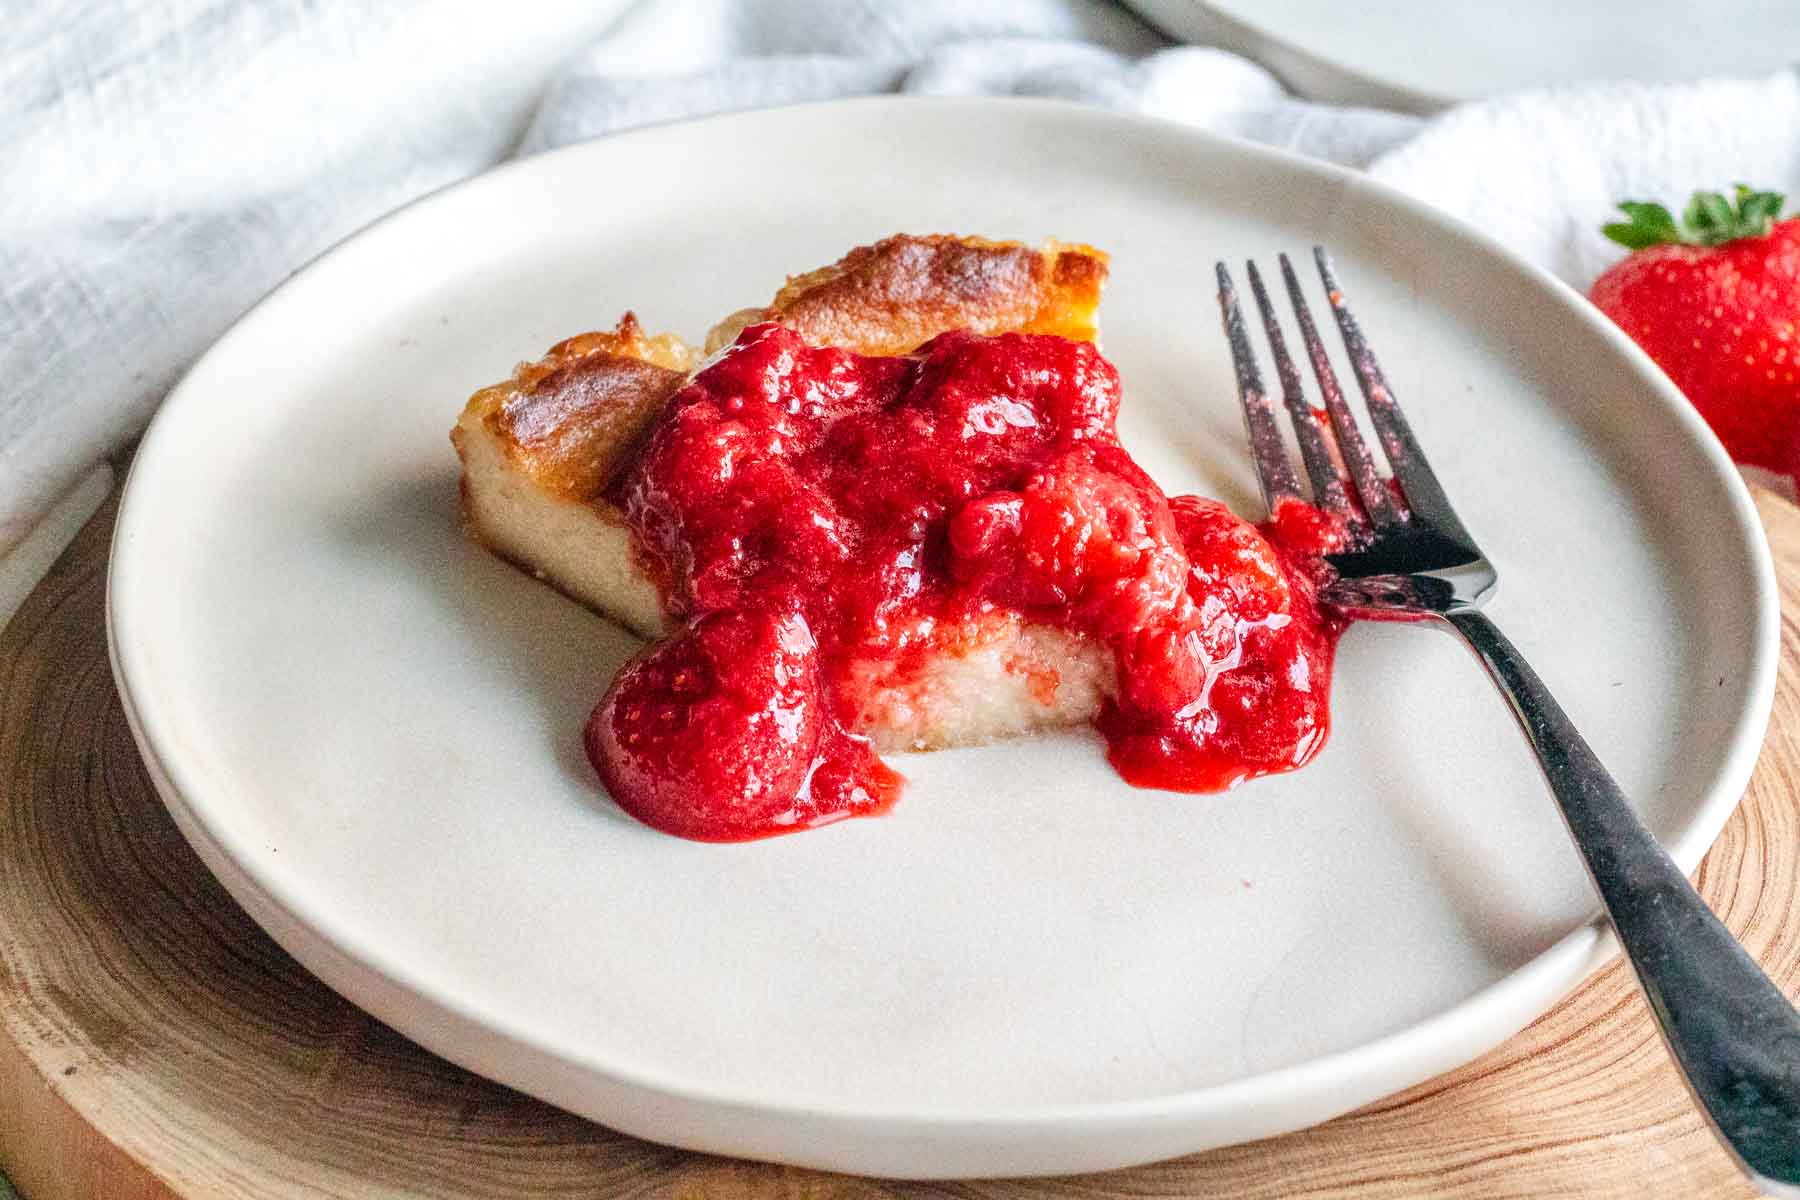 Vegan cheesecake with strawberry sauce with a fork.